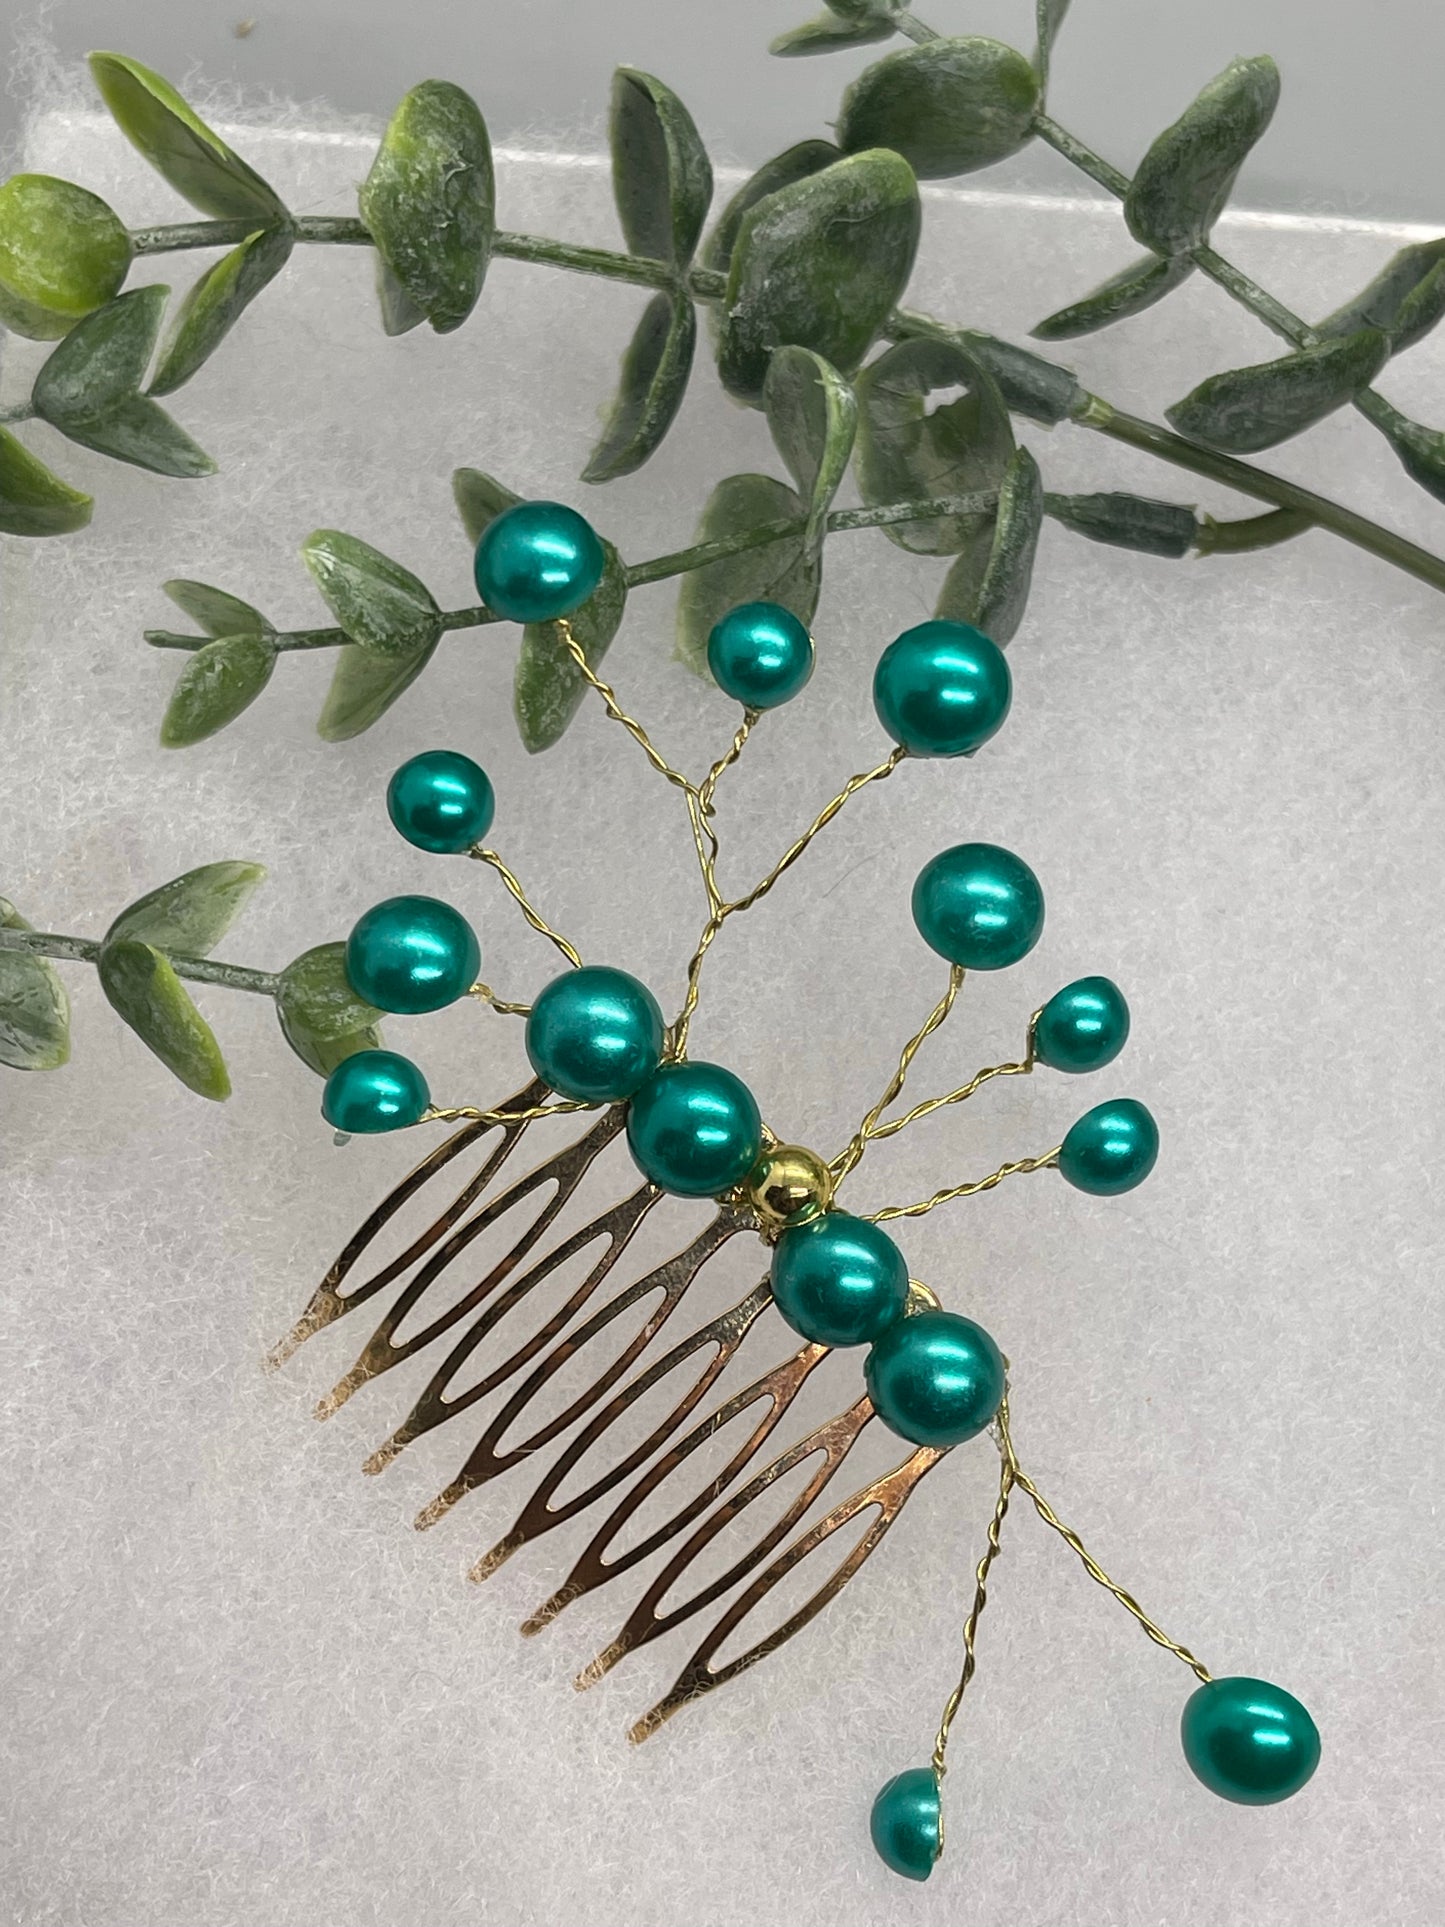 Teal faux Pearl 2.0” gold tone bridal side Comb accents vine handmade by hairdazzzel wedding accessory bride princess